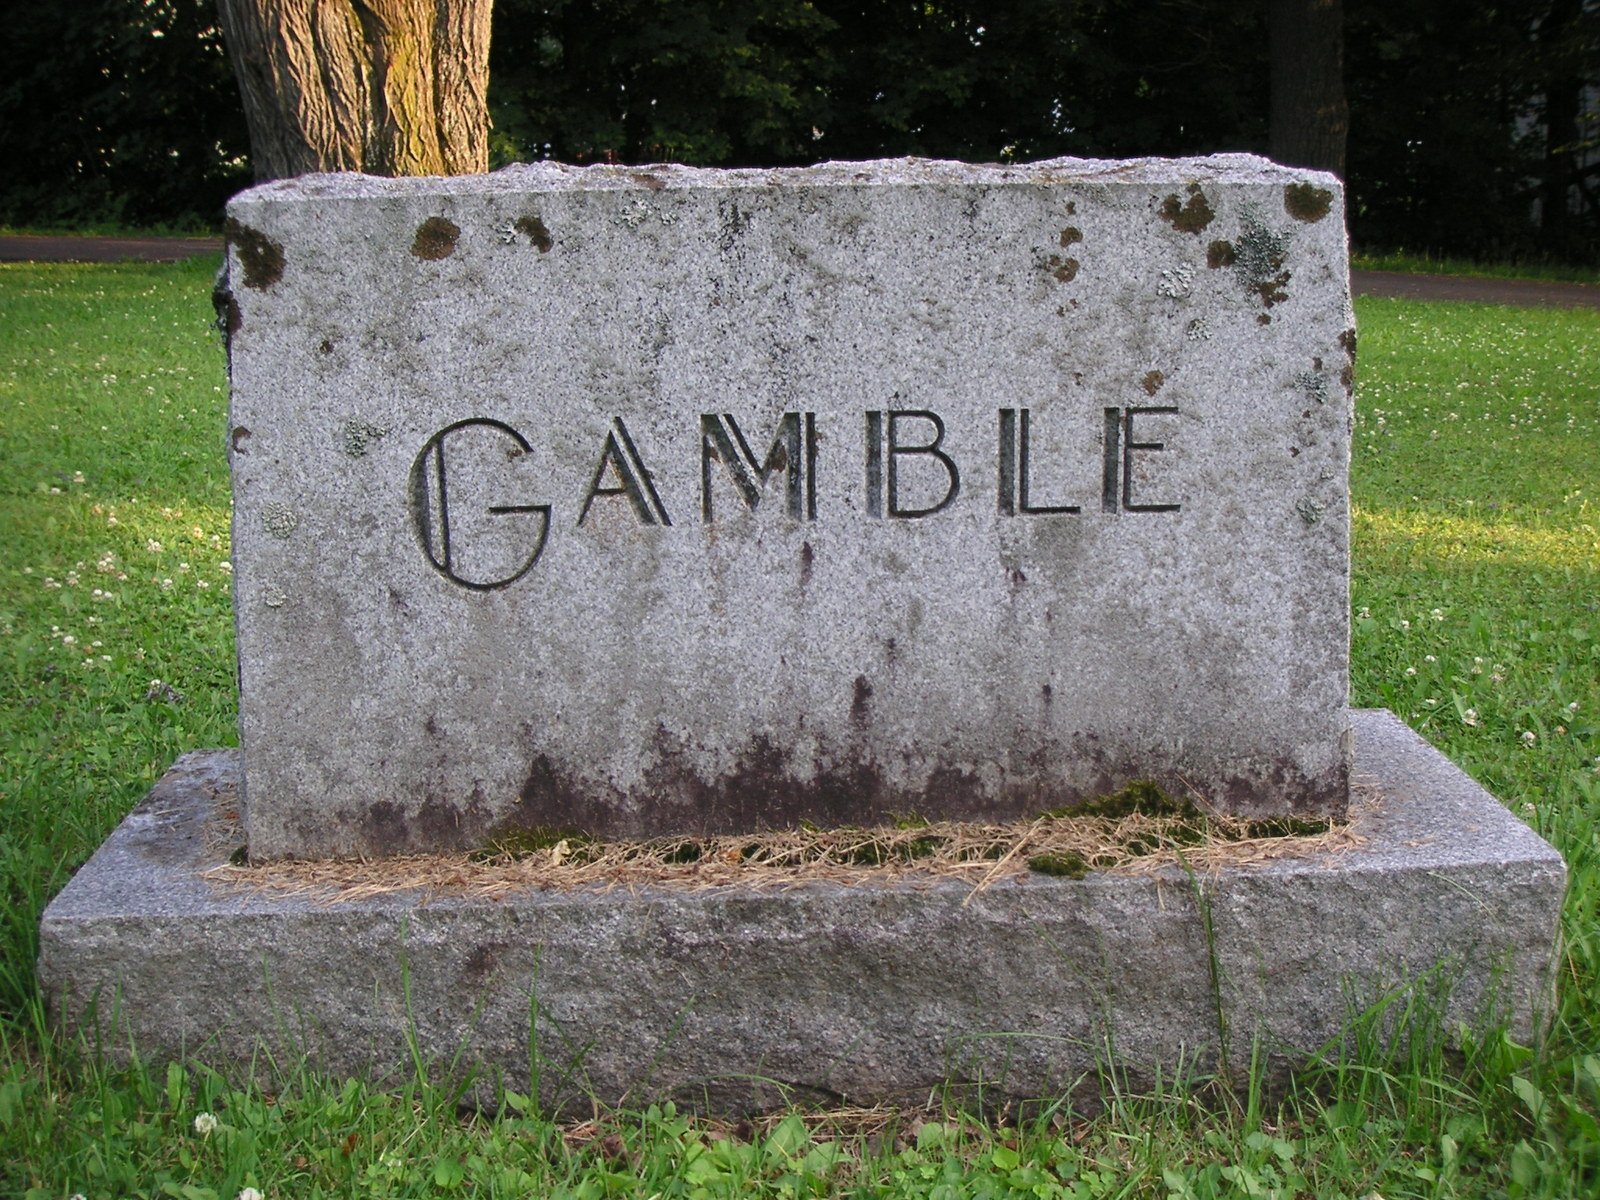 the grave marker is shown with graffiti on it